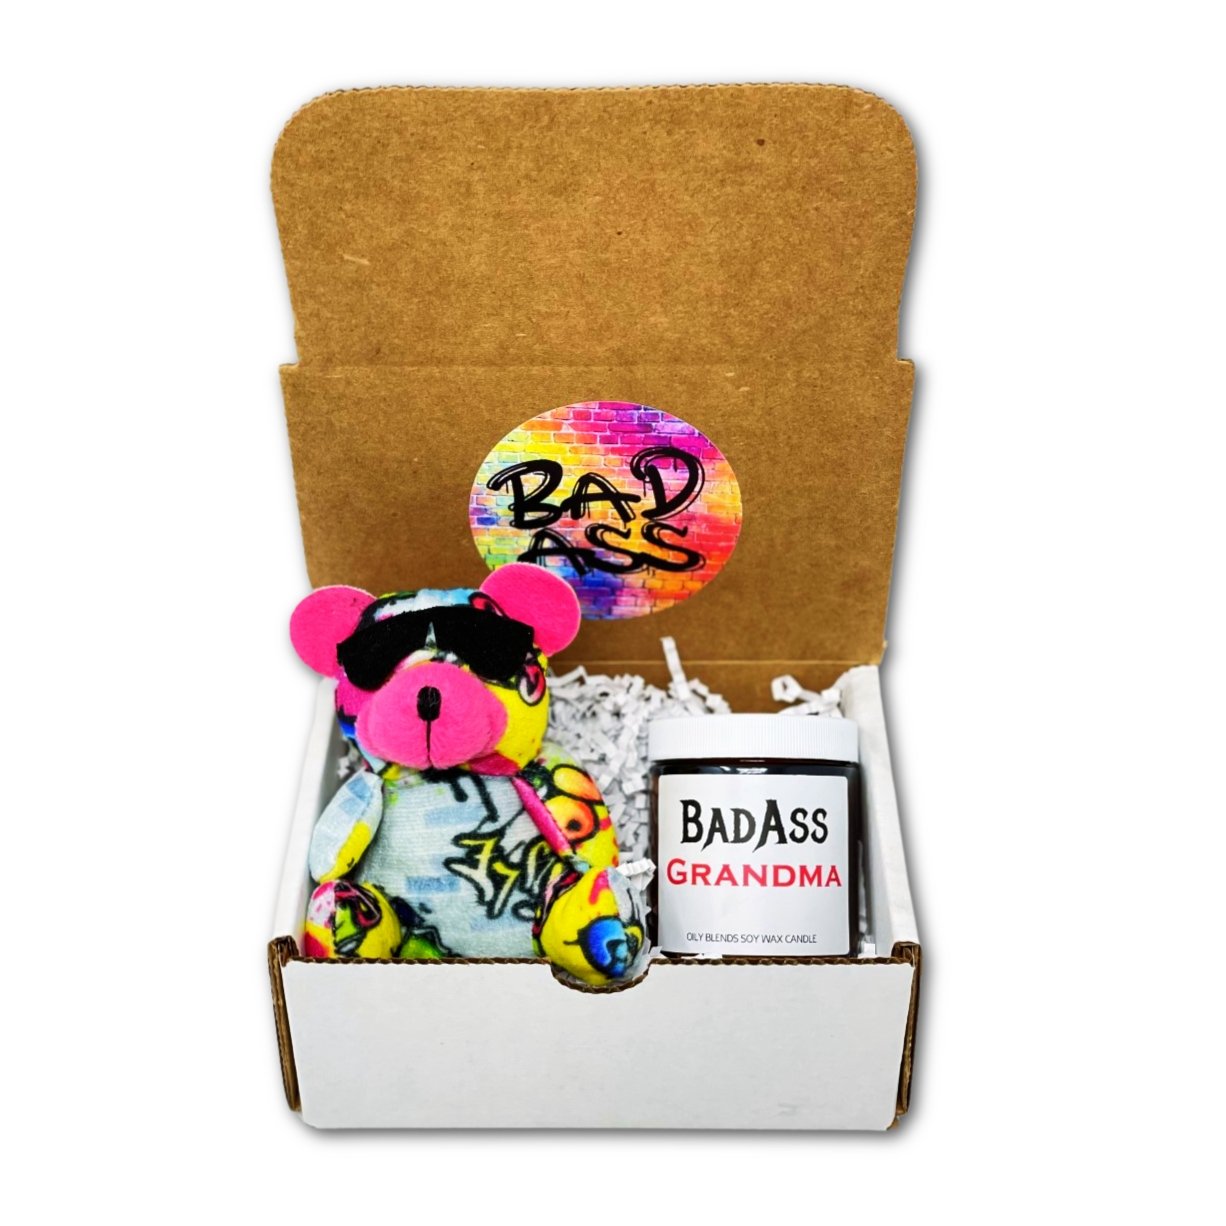 Bad Ass Gift Sets - Includes candles and badass plush - Oily BlendsBad Ass Gift Sets - Includes candles and badass plush